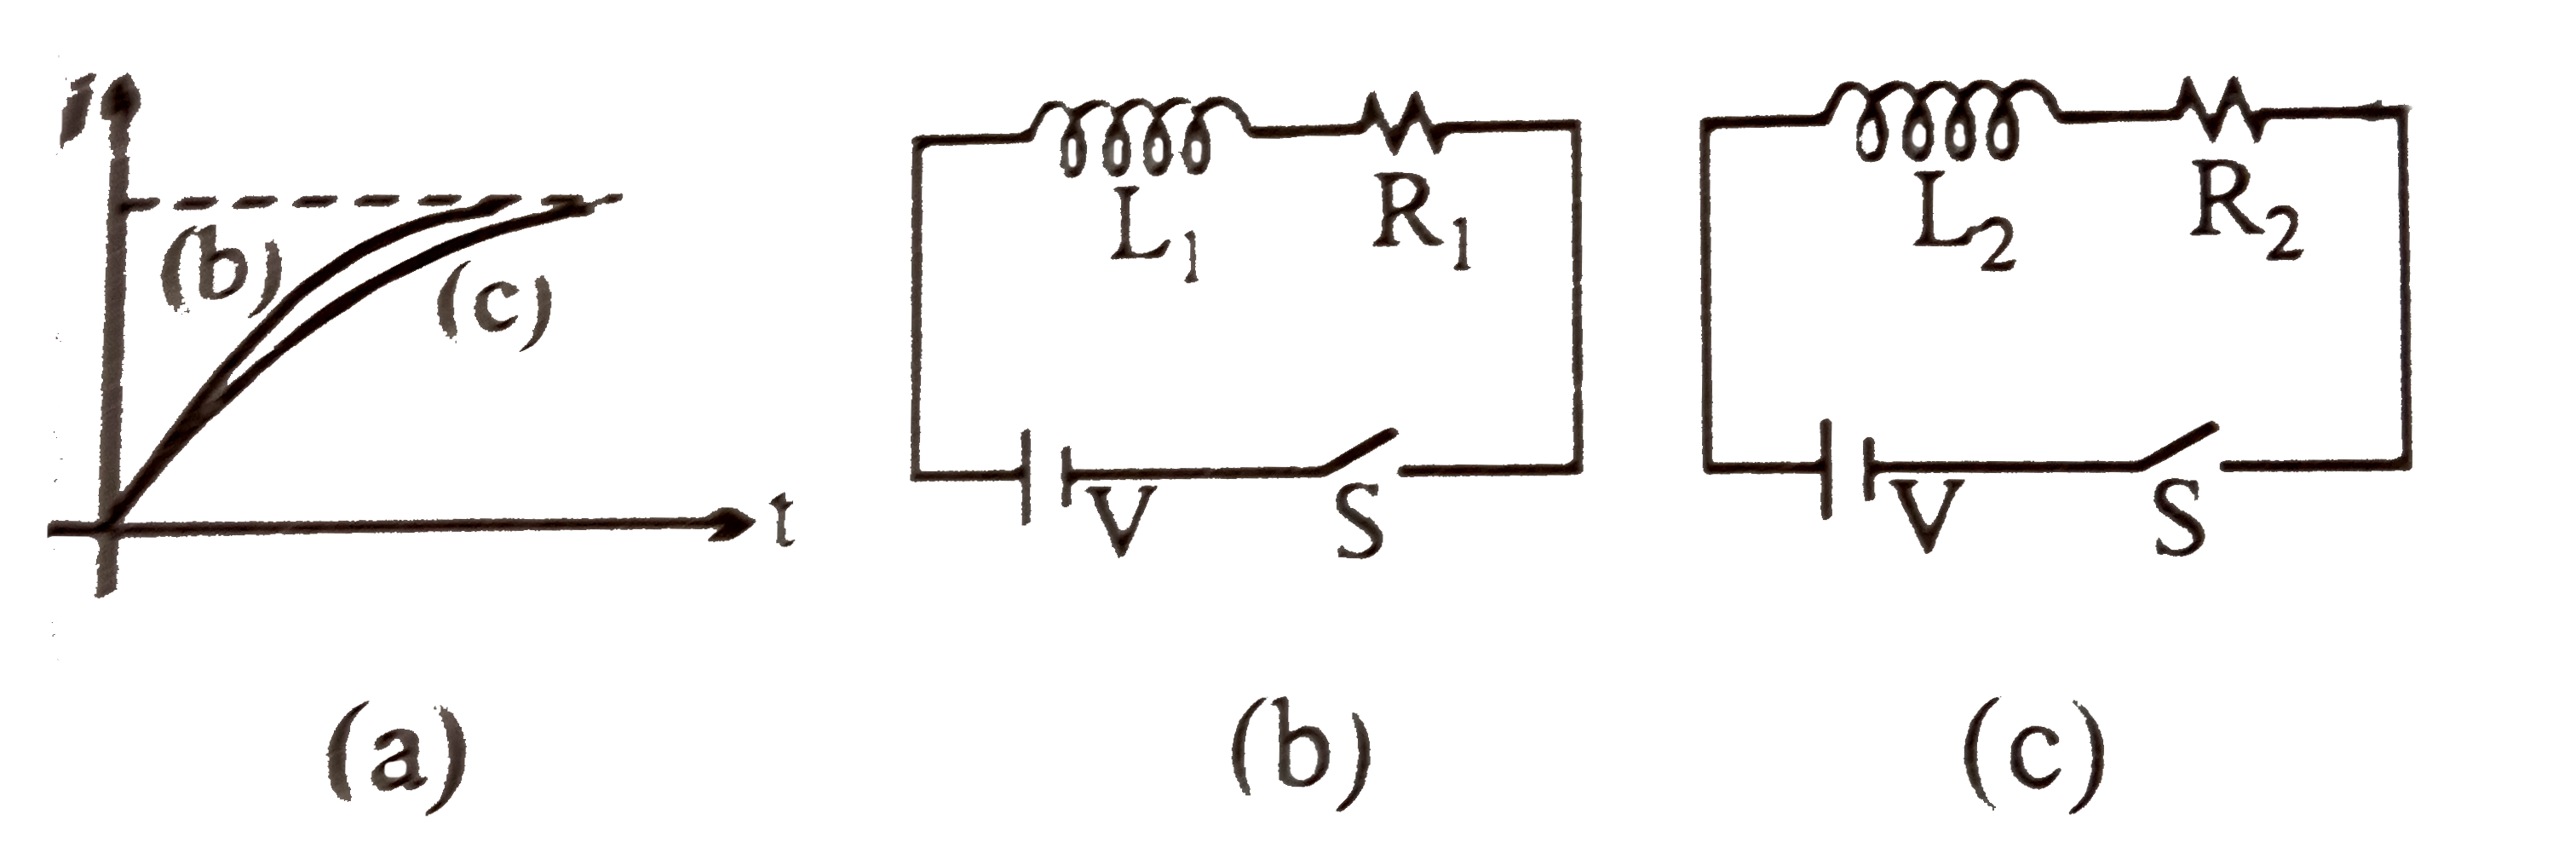 Current growth in two L-R circuits (b) and (c ) as shown in figure (a). Let L(1), L(2), R(1) and R(1) be the corresponding values in two circuits. Then